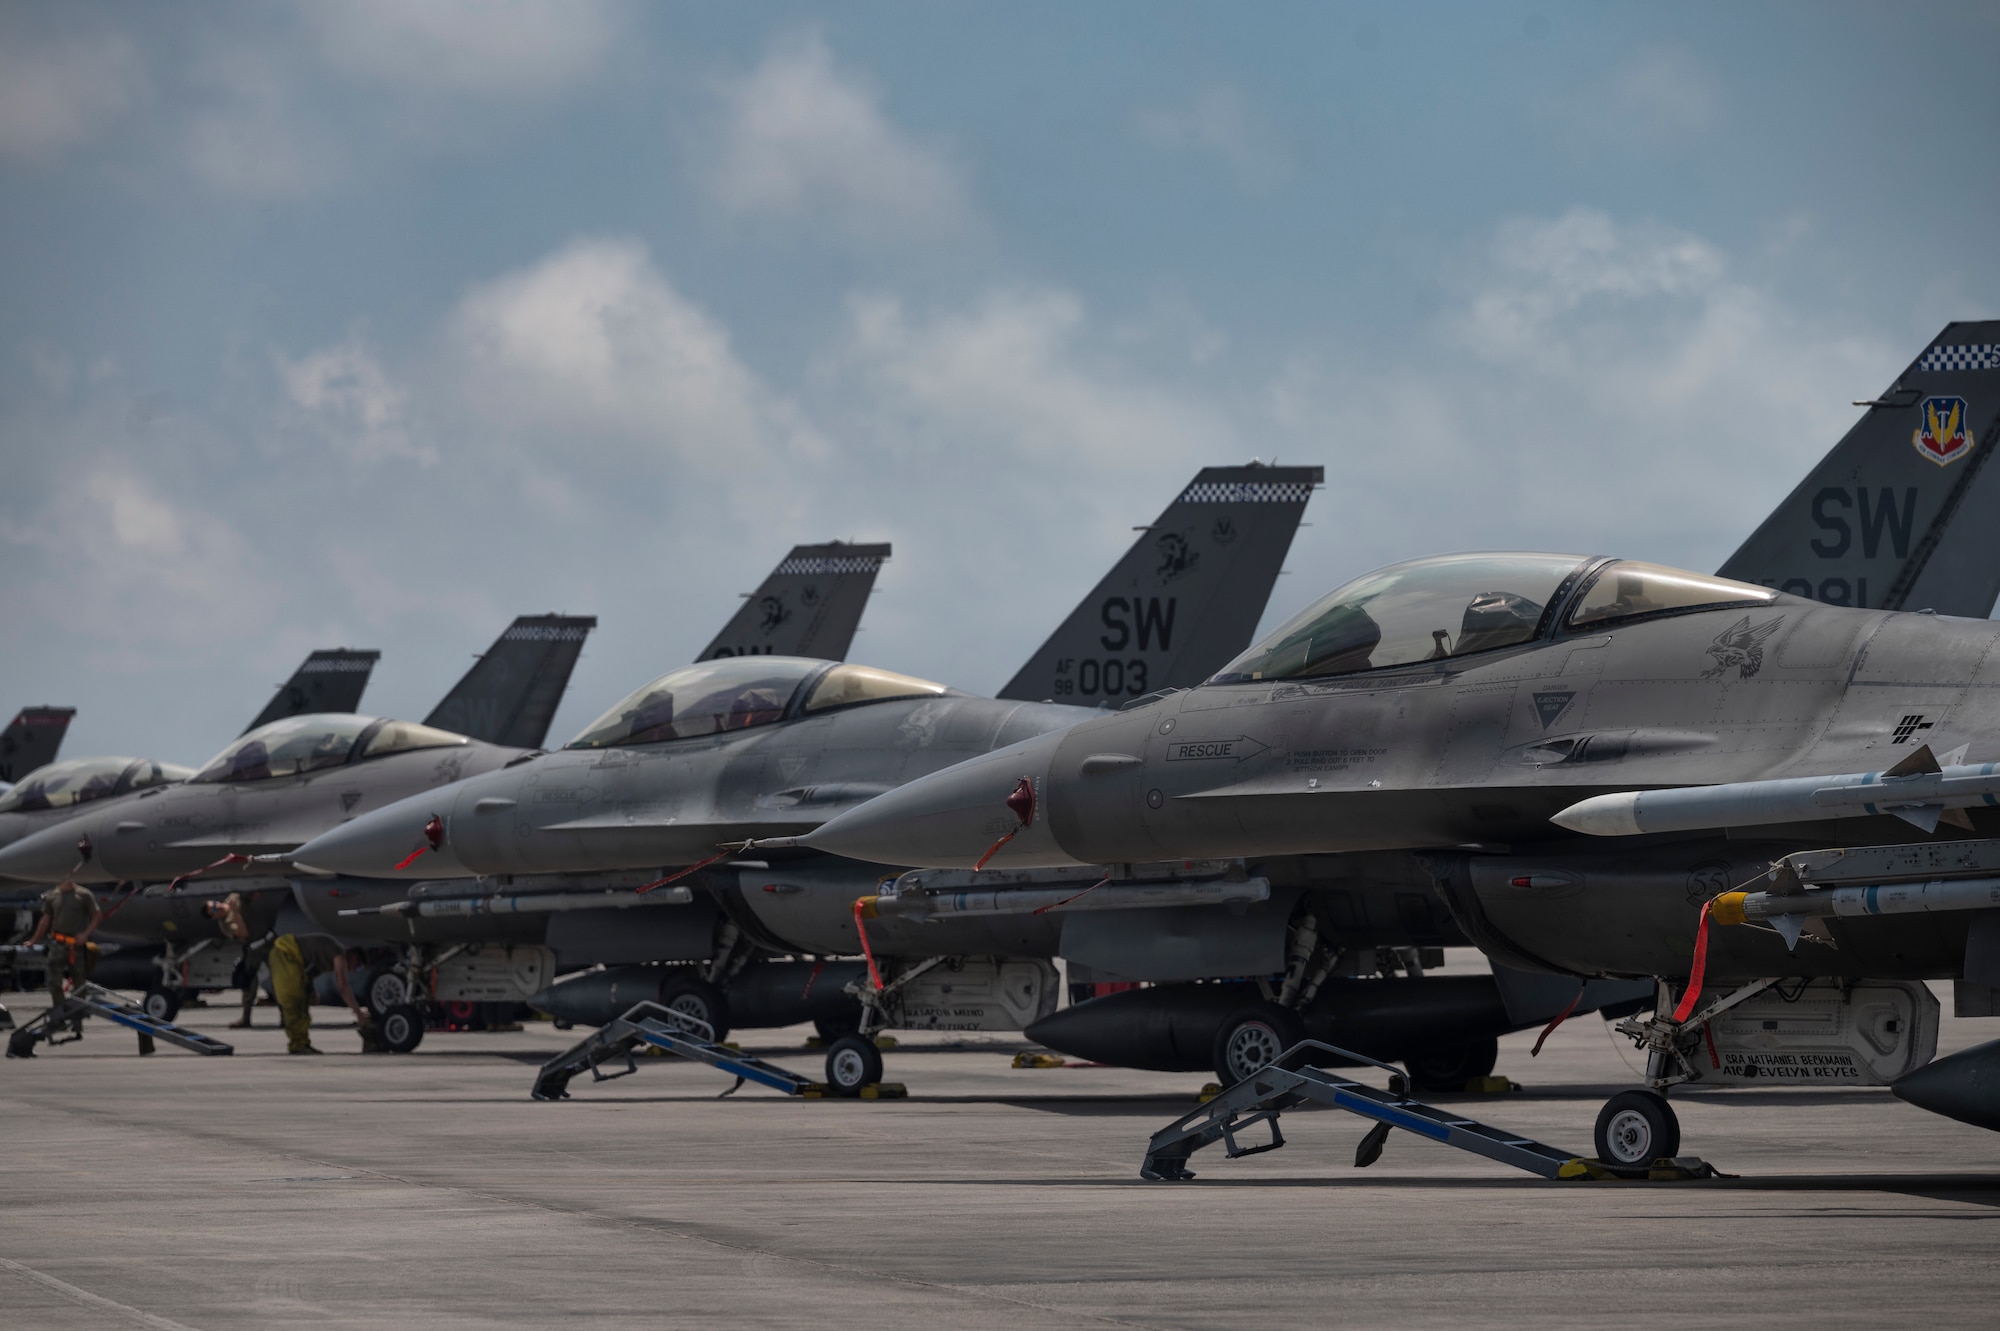 A fleet of F-16 Fighting Falcons assigned to the 55th Fighter Squadron, Shaw Air Force Base, S.C., sit on the flightline during Weapons System Evaluation Program-East 23.08 at Tyndall AFB, Fla., May 17, 2023. Eligible active-duty aviators have until Sept. 15, 2023 to apply for the fiscal year 2023 Aviation Bonus Program; Air Force officials announced the Legacy Aviation Bonus Program will open June 6, 2023. (U.S. Air Force photo by Senior Airman Tiffany Del Oso)